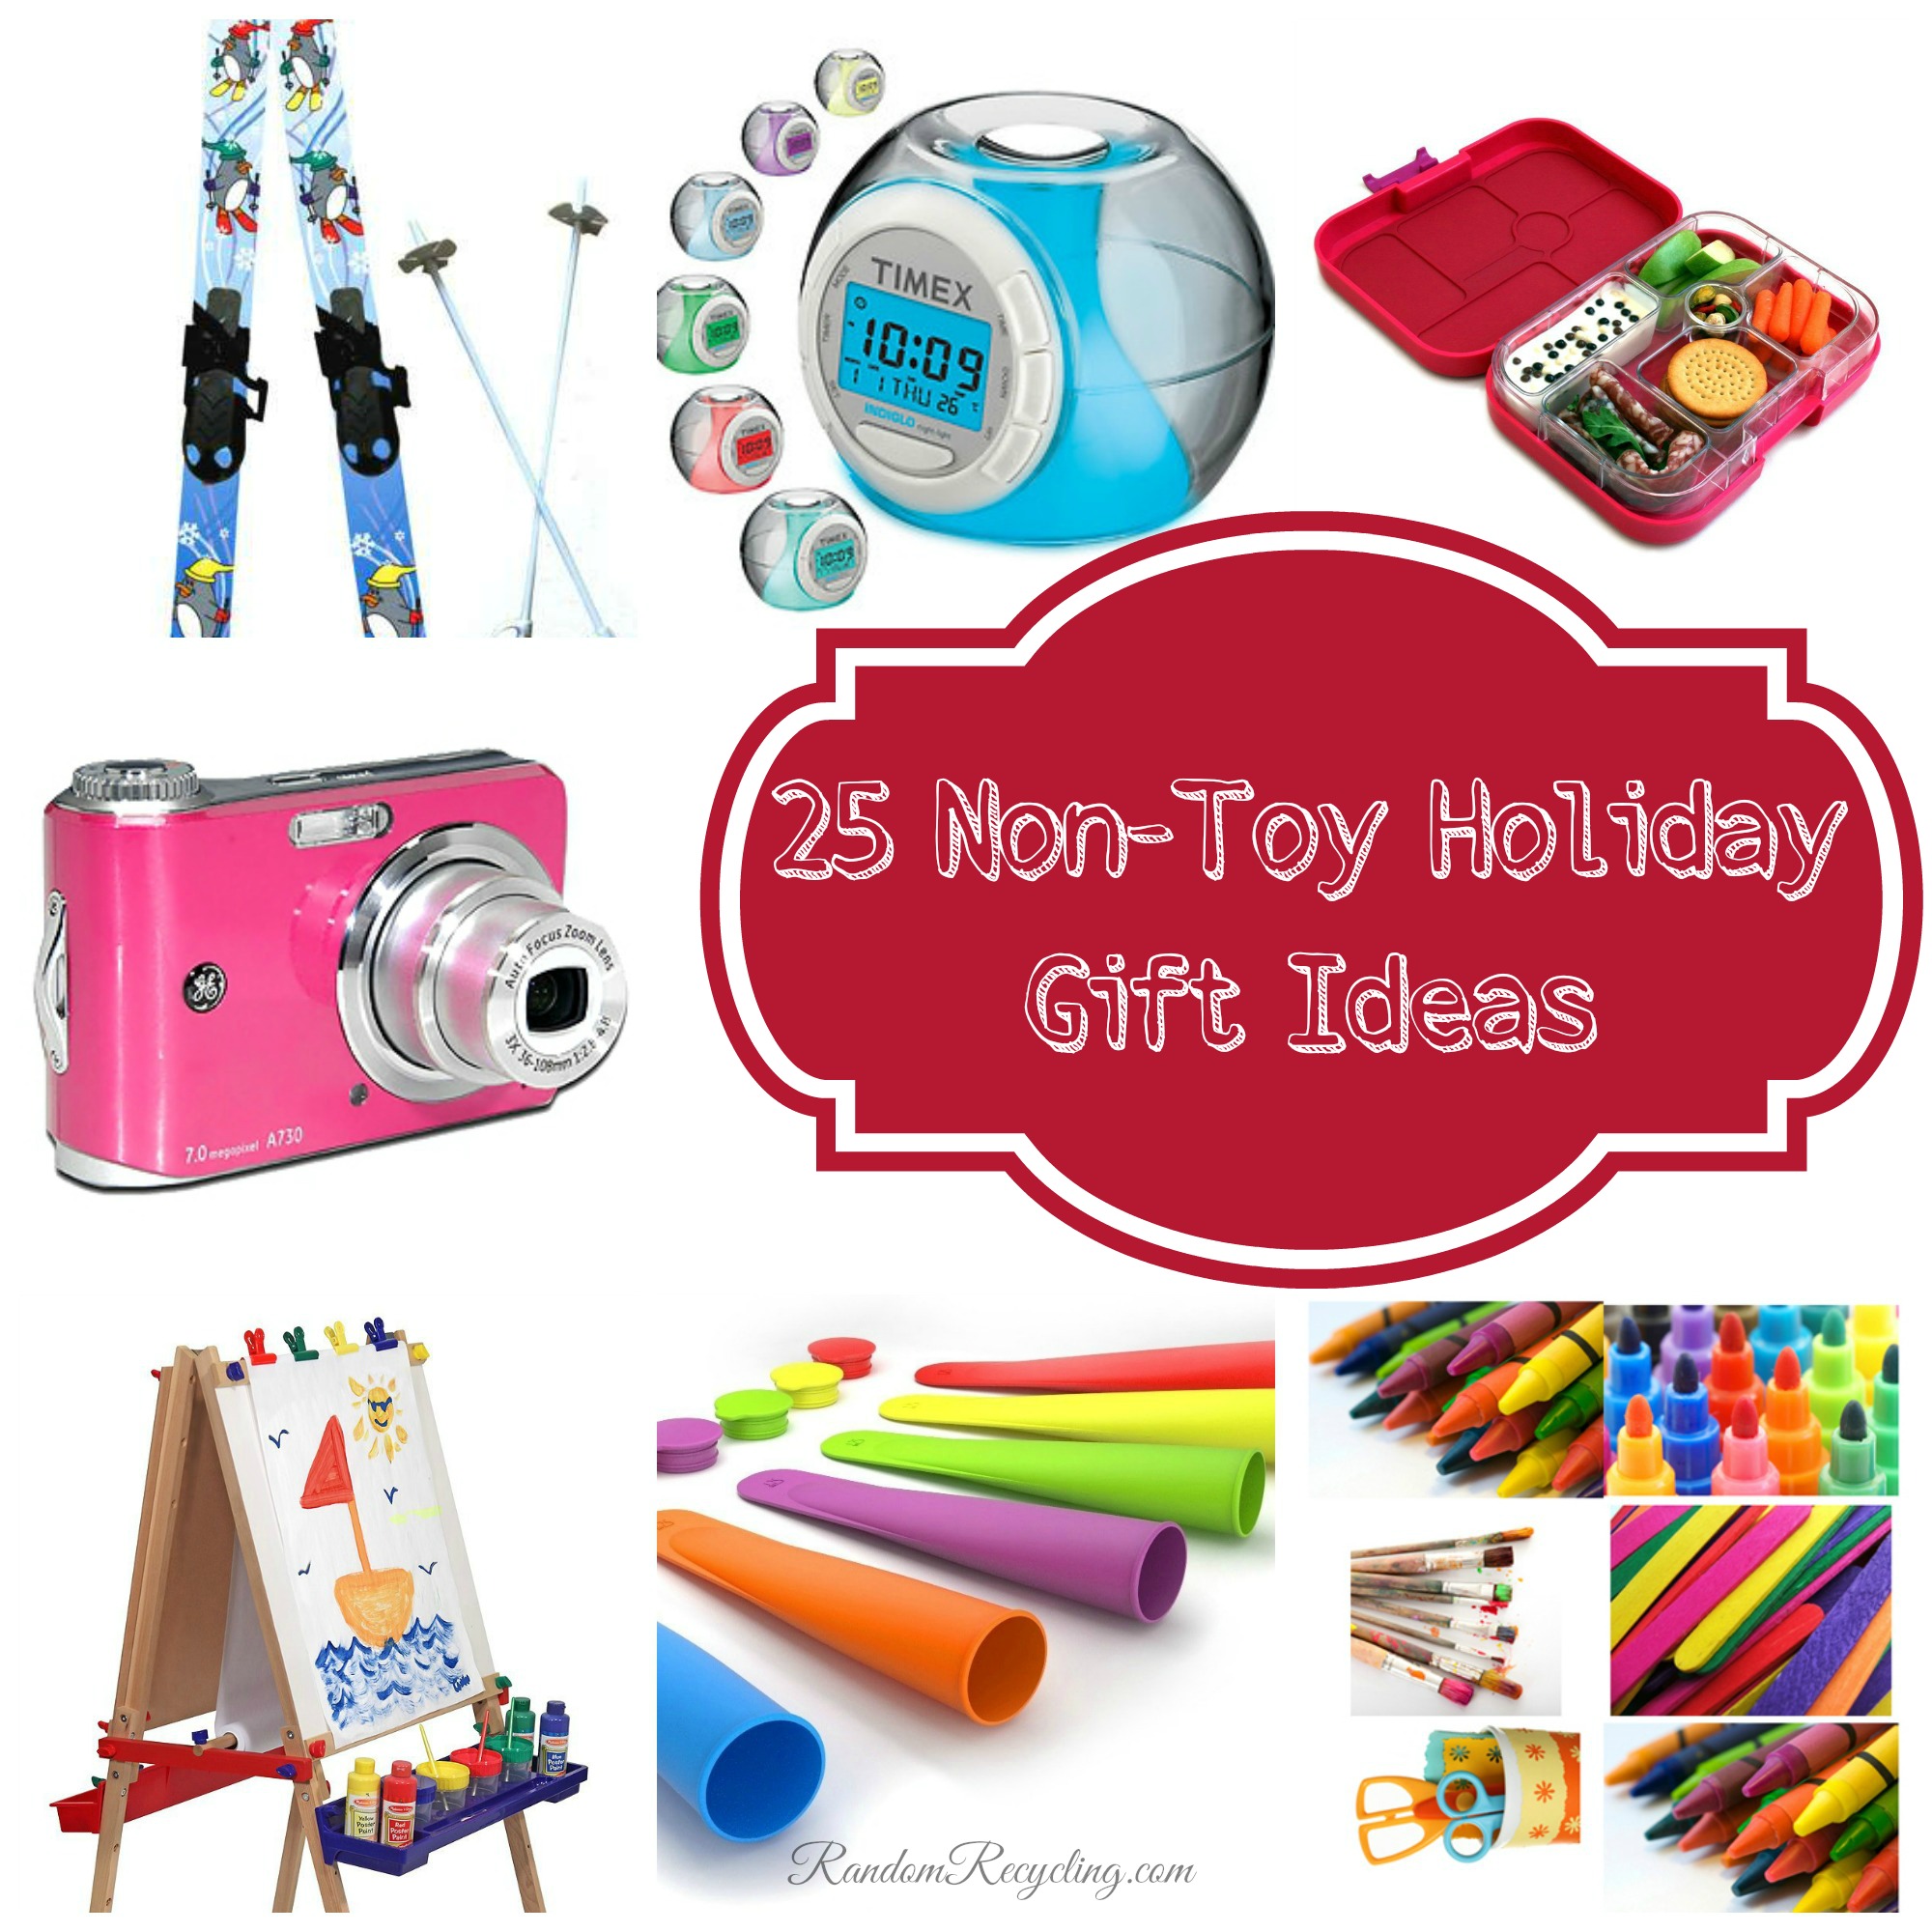 gift ideas that are not toys